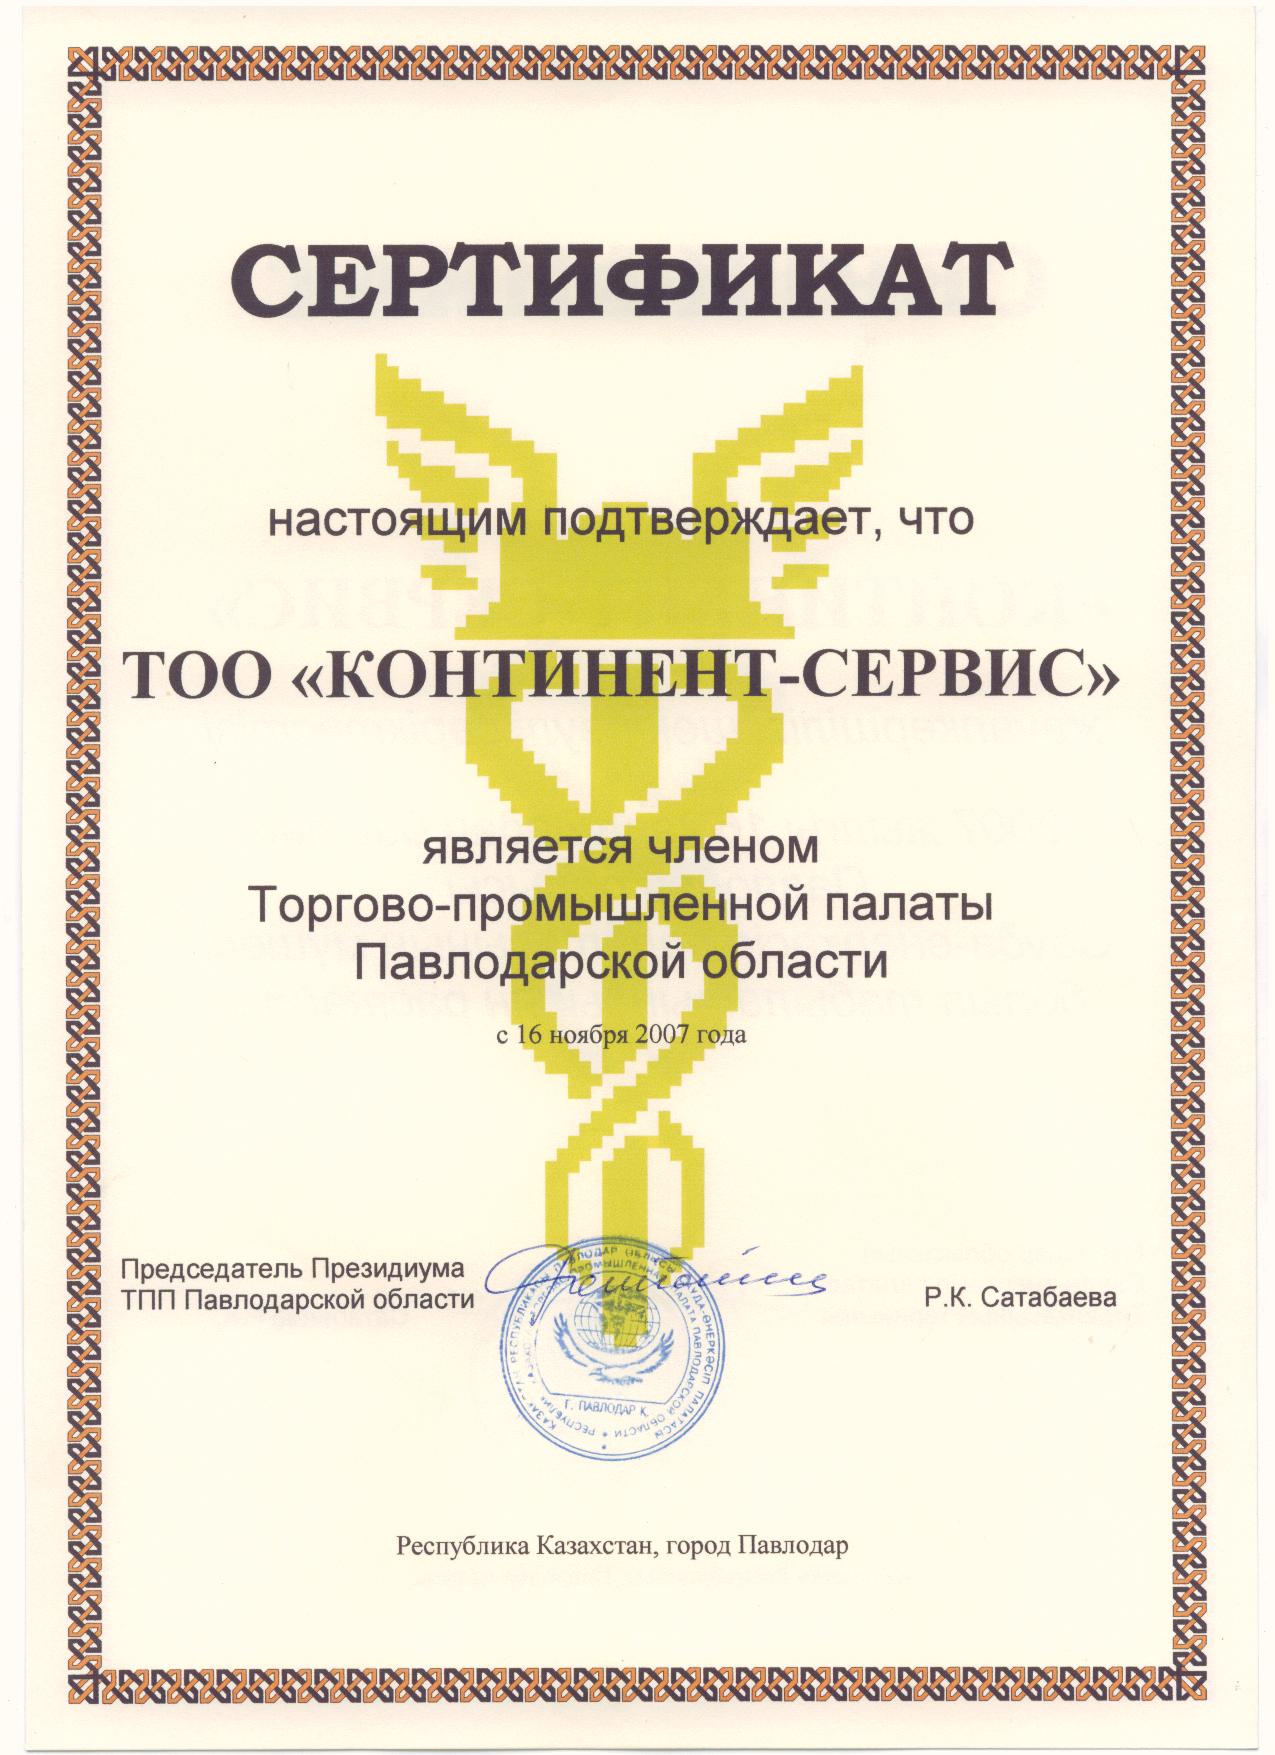 A member of Pavlodar region chamber of commerce and industry